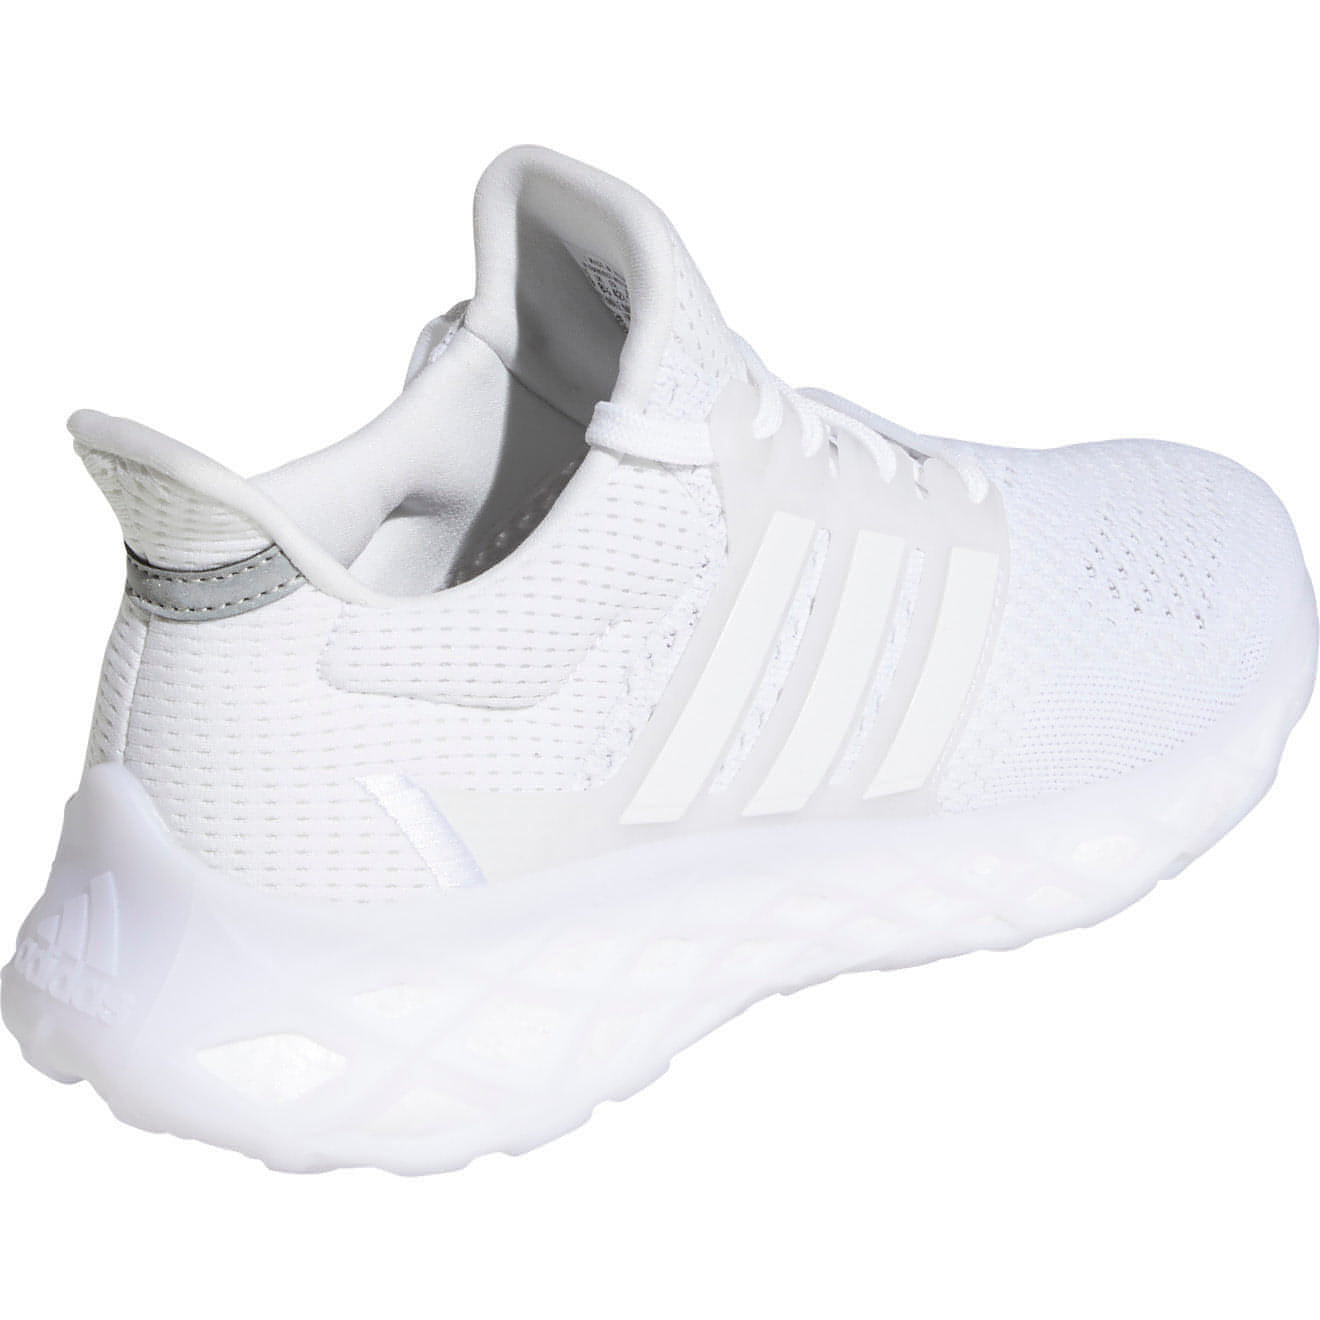 Adidas Ultra Boost Web Dna Gy4167 Back View